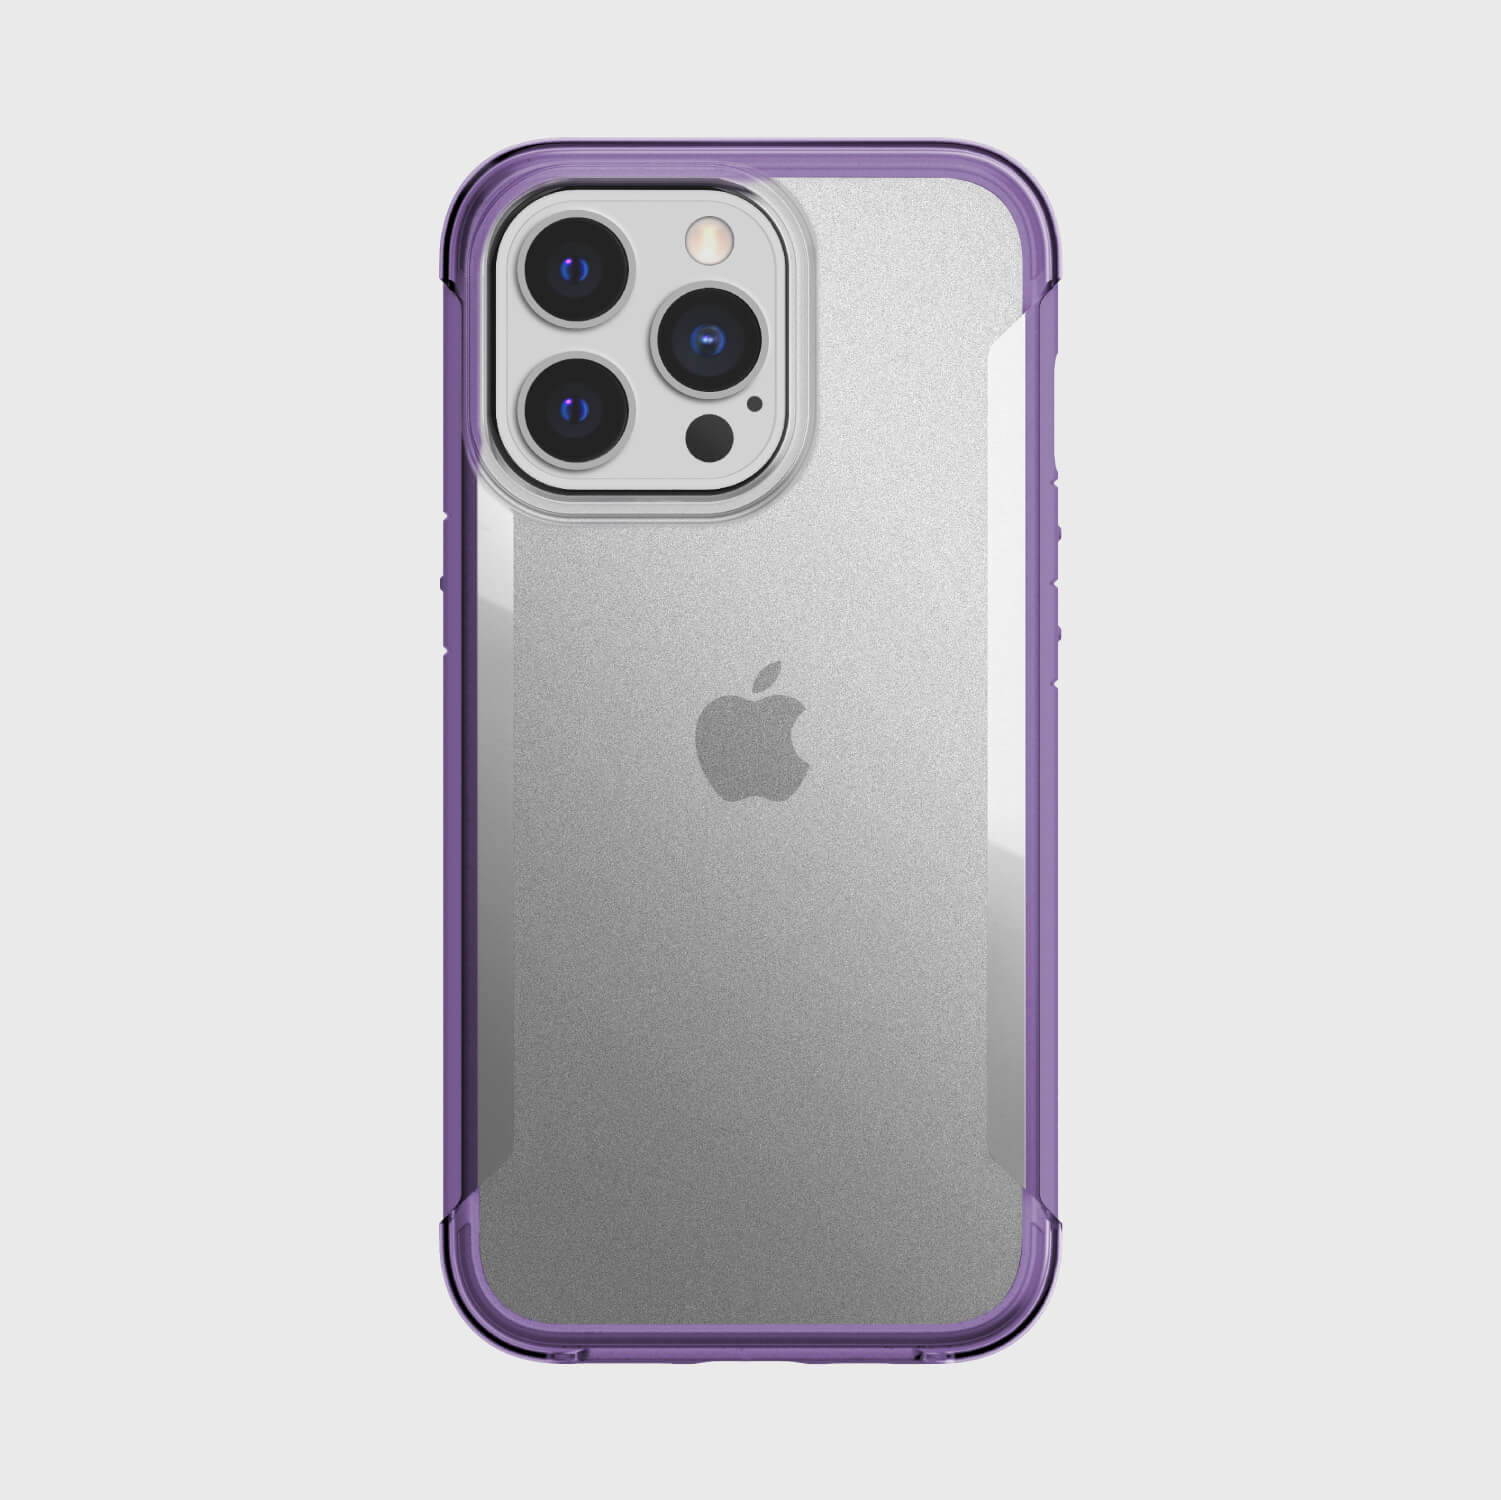 The back view of an eco-friendly iPhone 13 Pro Case - TERRAIN in purple from Raptic.